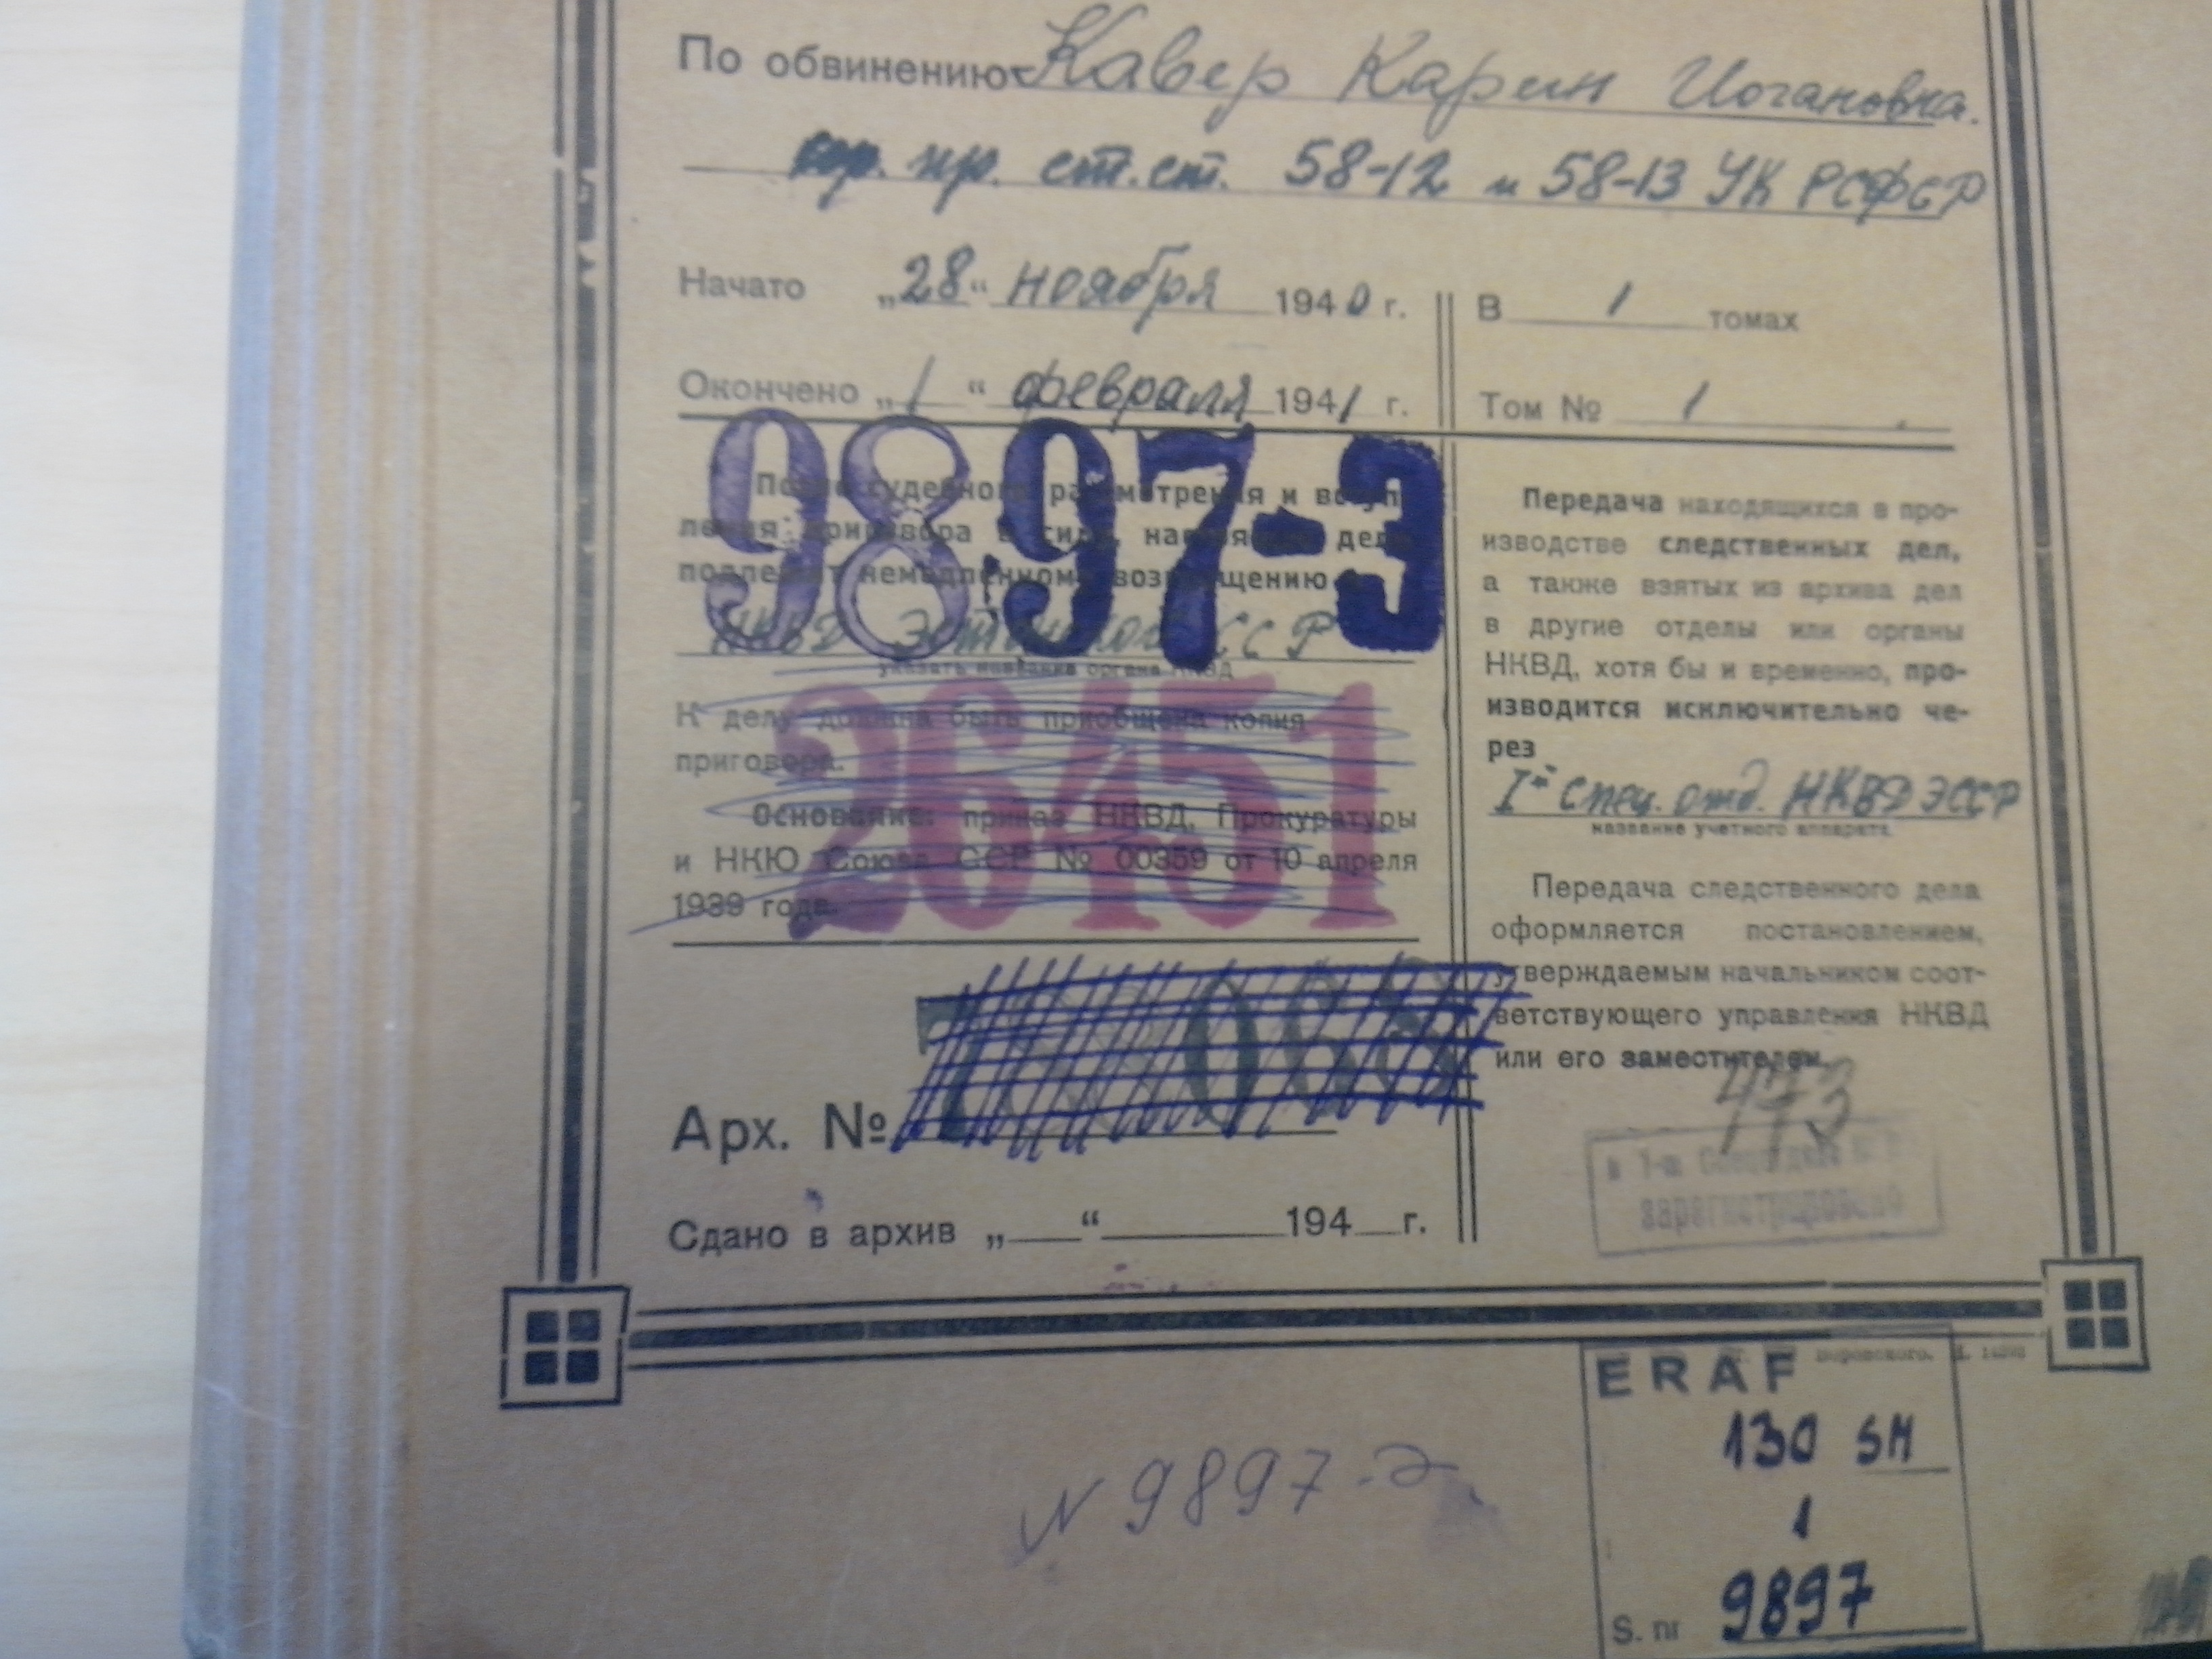 A typical cover of a case file from the collection.